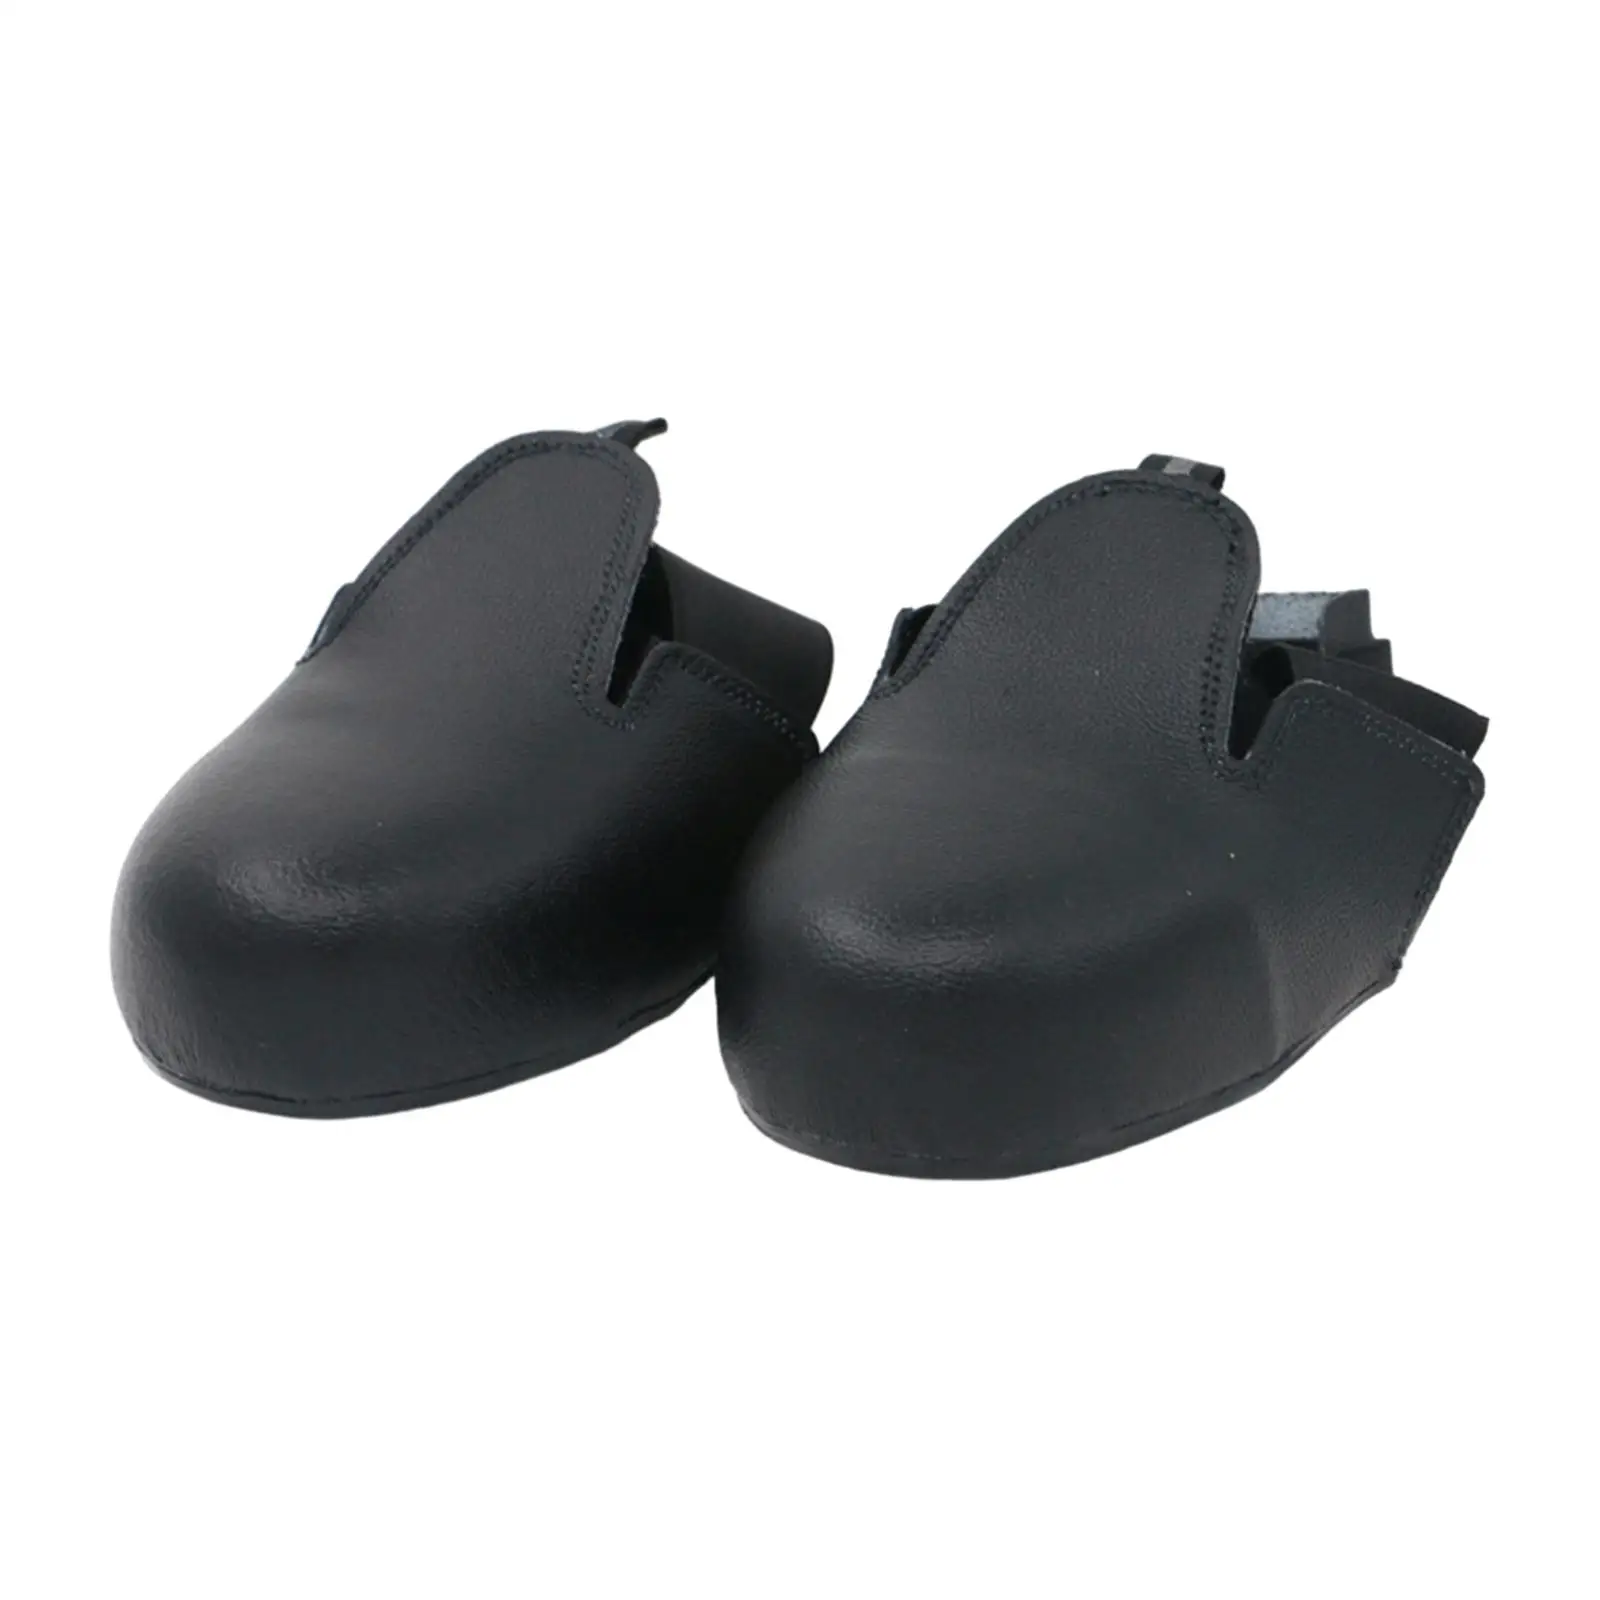 PU Leather Overshoes Cover Toe Work Shoe Cover Shoe Cap for Industry PU Leather Sole Caps Anti Smashing PU Leather Shoes Covers